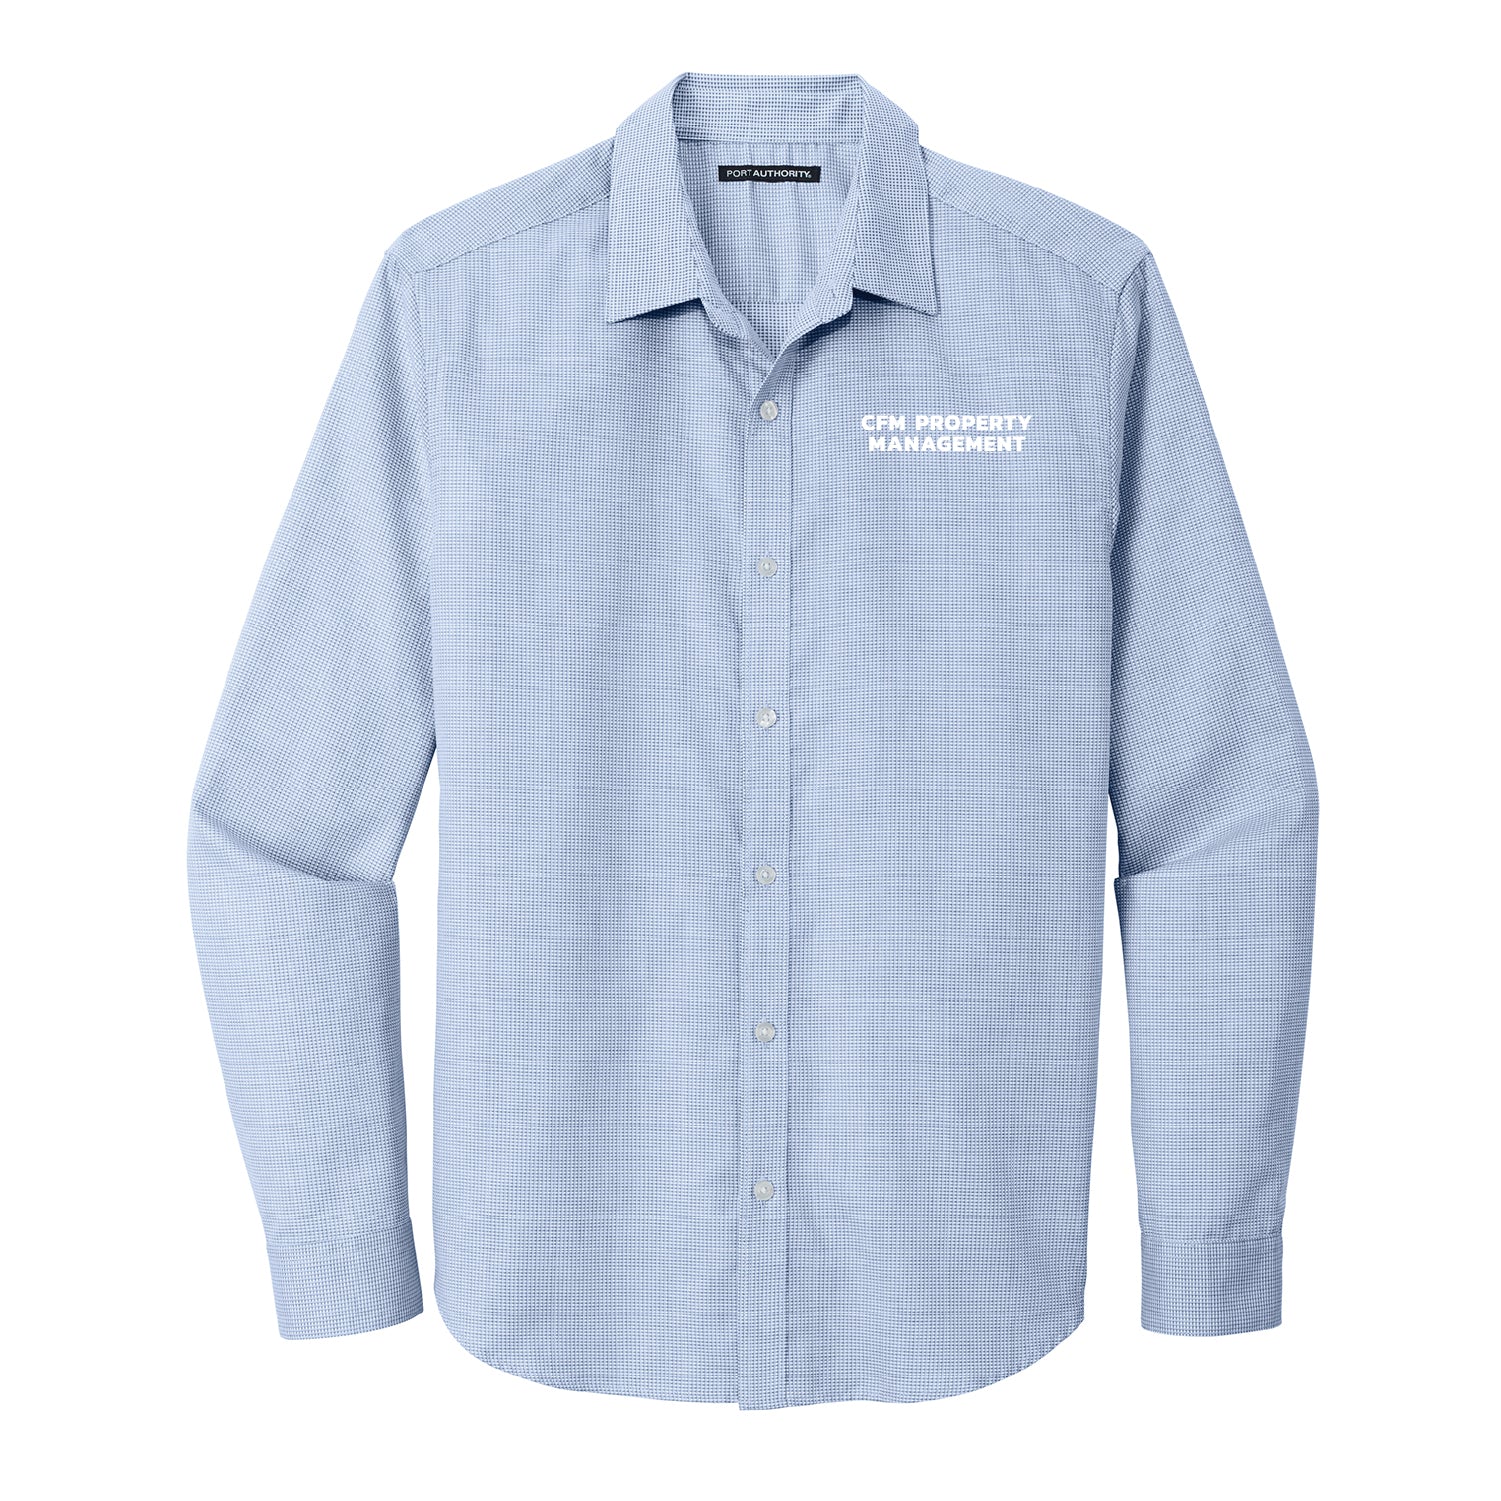 CFM 3 Pincheck Easy Care Shirt - DSP On Demand